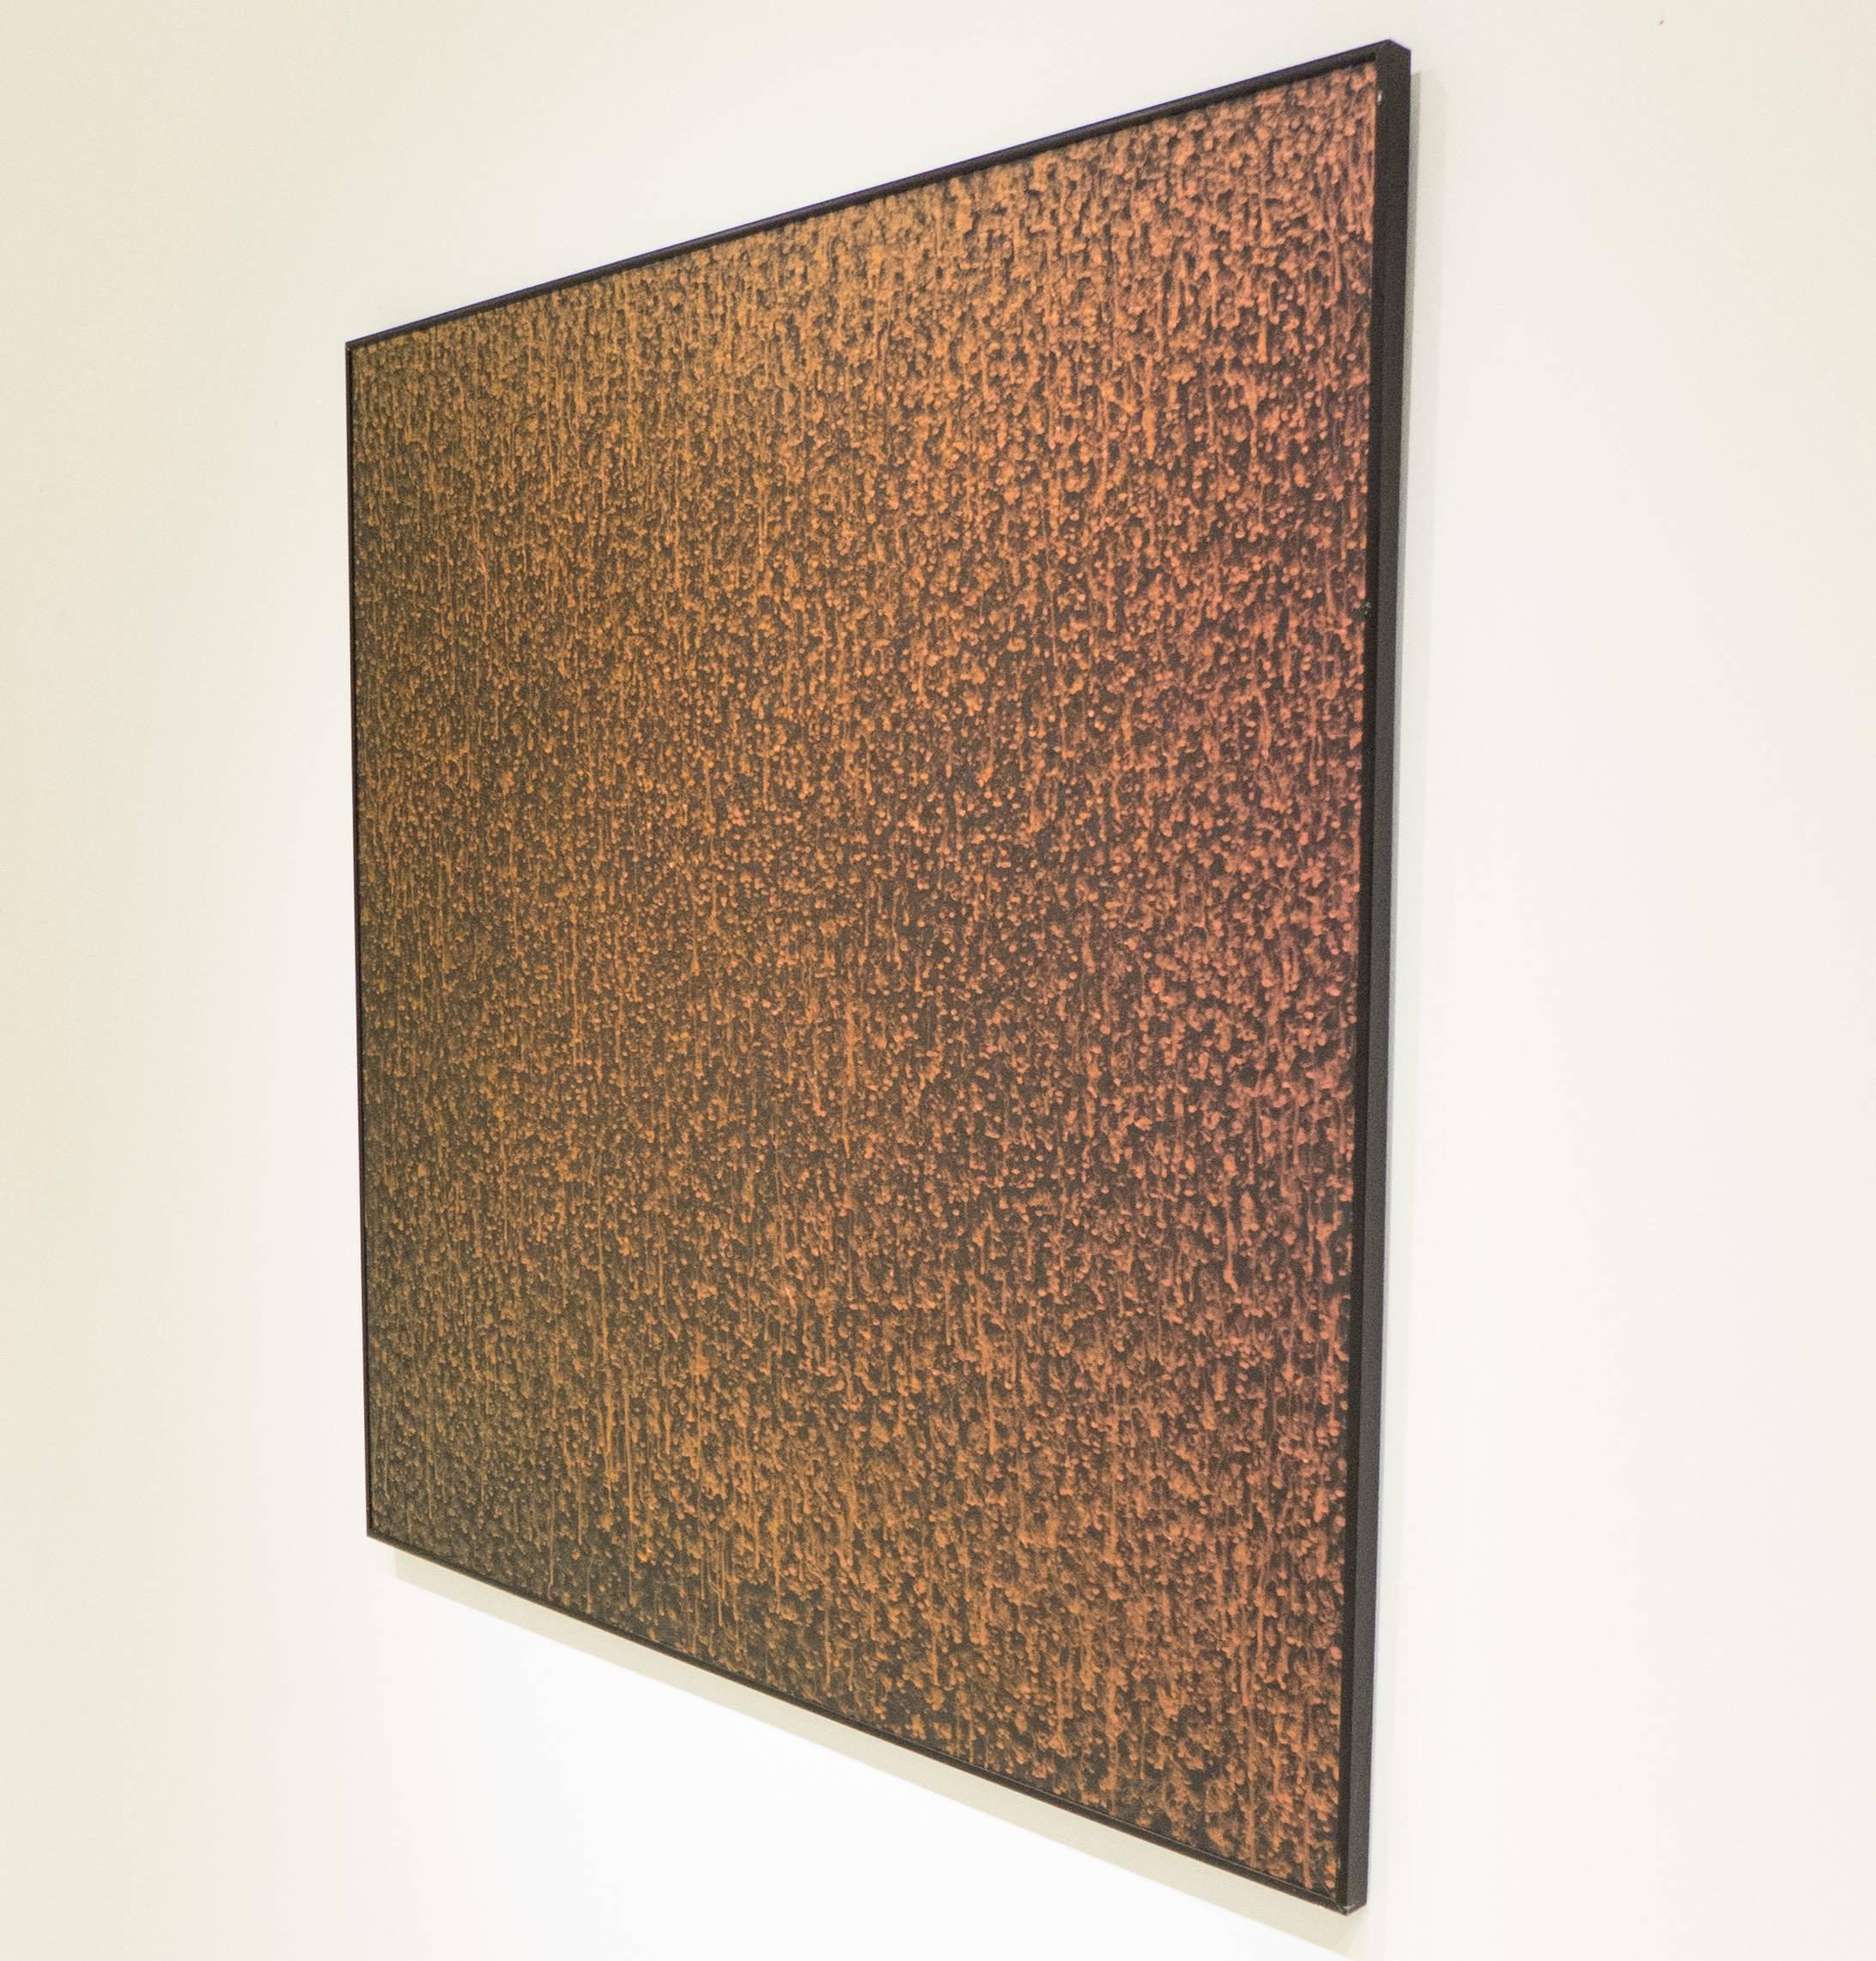 Transfer on tempered masonite, titled "Irreducible Motif #15," by David Roth, 2008. Roth (b. 1942) studied with Aaron Siskind and Harry Callahan at the Chicago Institute of Design in the early 1960s. He was represented by New York City's